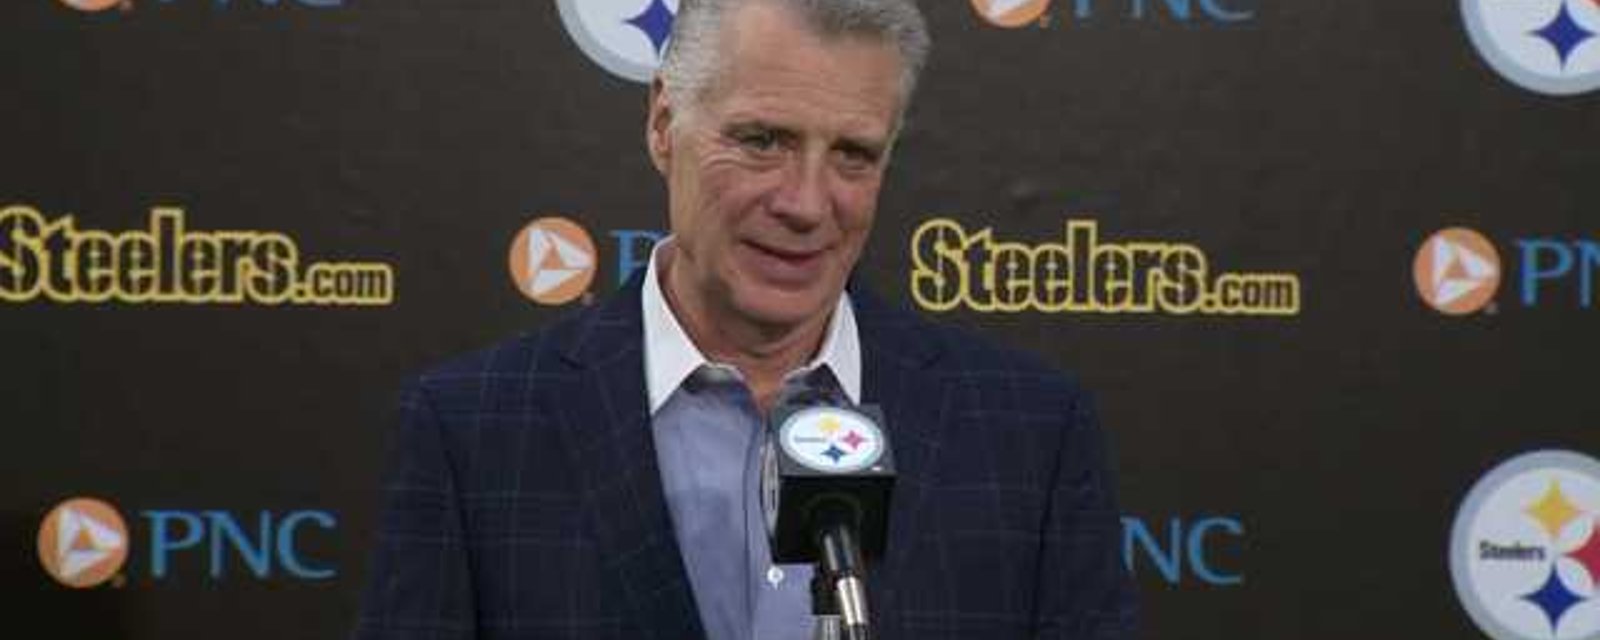 Steelers president Art Rooney II to make special announcement 